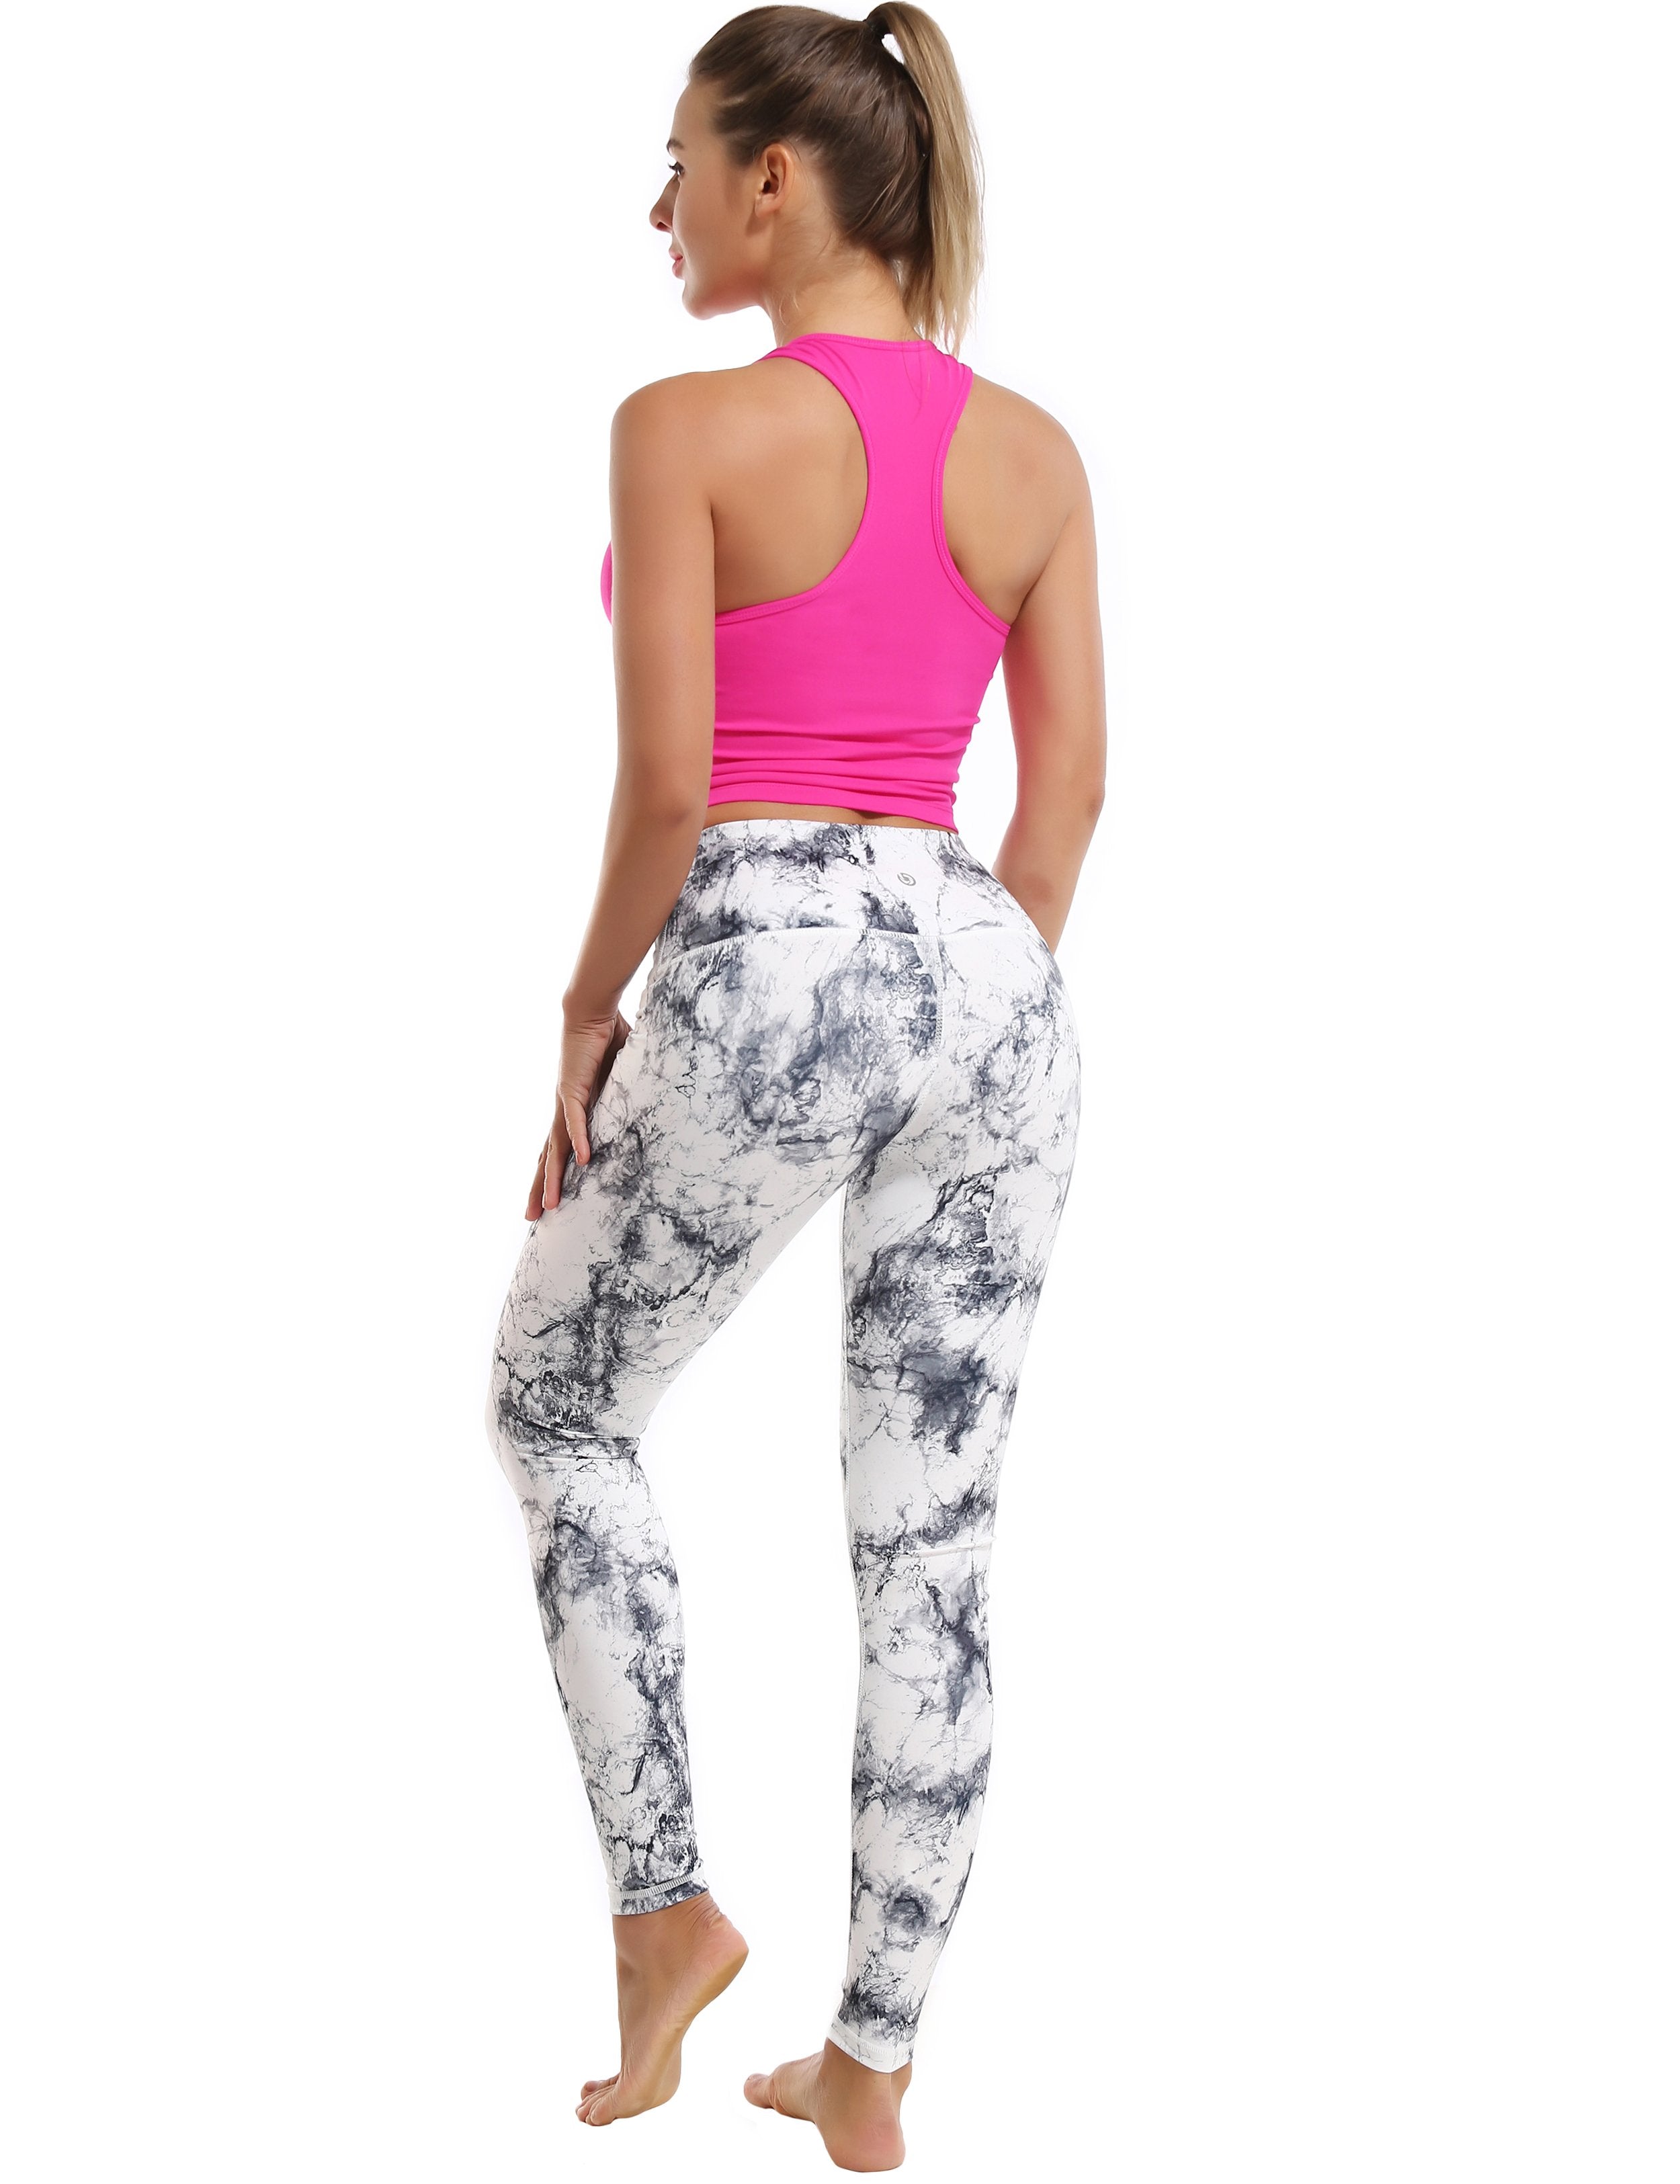 High Waist Gym Pants arabescato 82%Polyester/18%Spandex Fabric doesn't attract lint easily 4-way stretch No see-through Moisture-wicking Tummy control Inner pocket